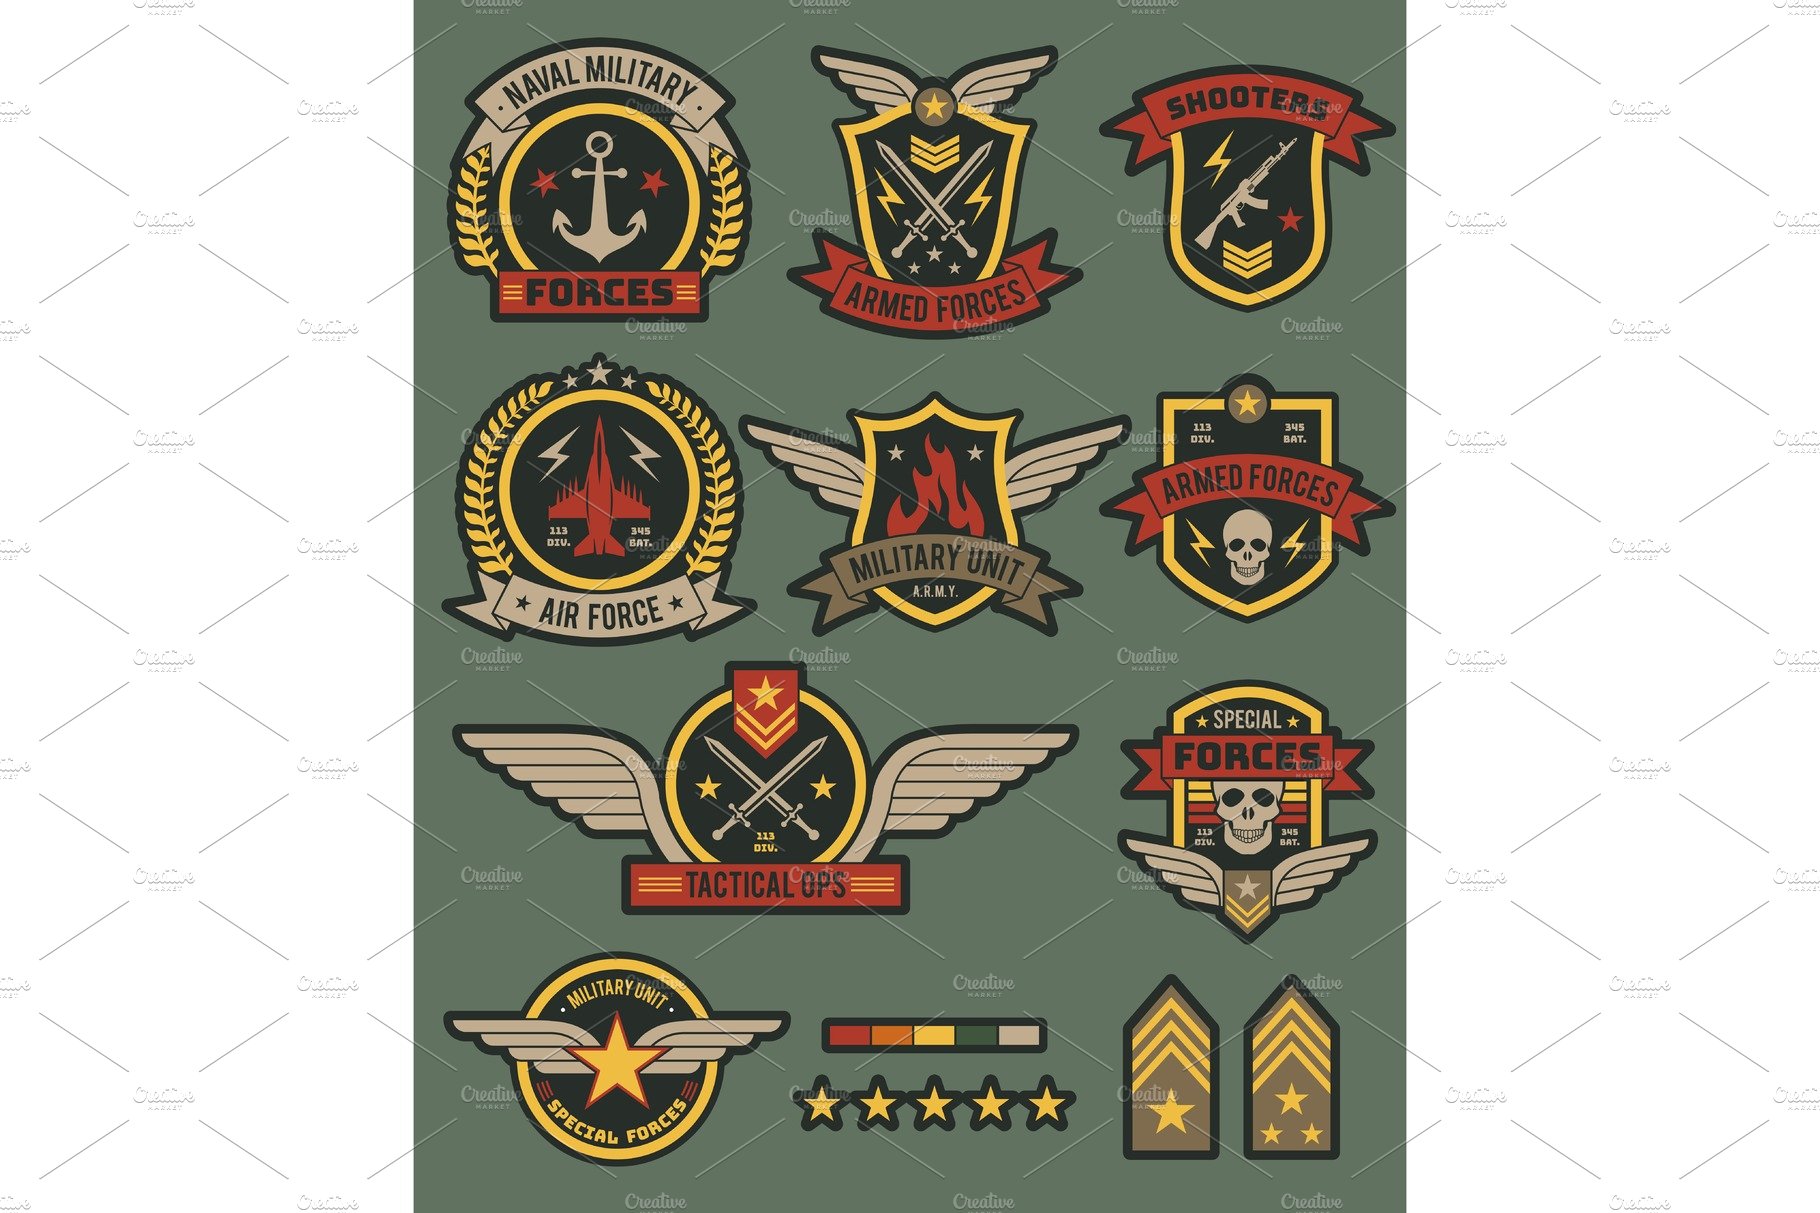 Military army badges. Patches cover image.